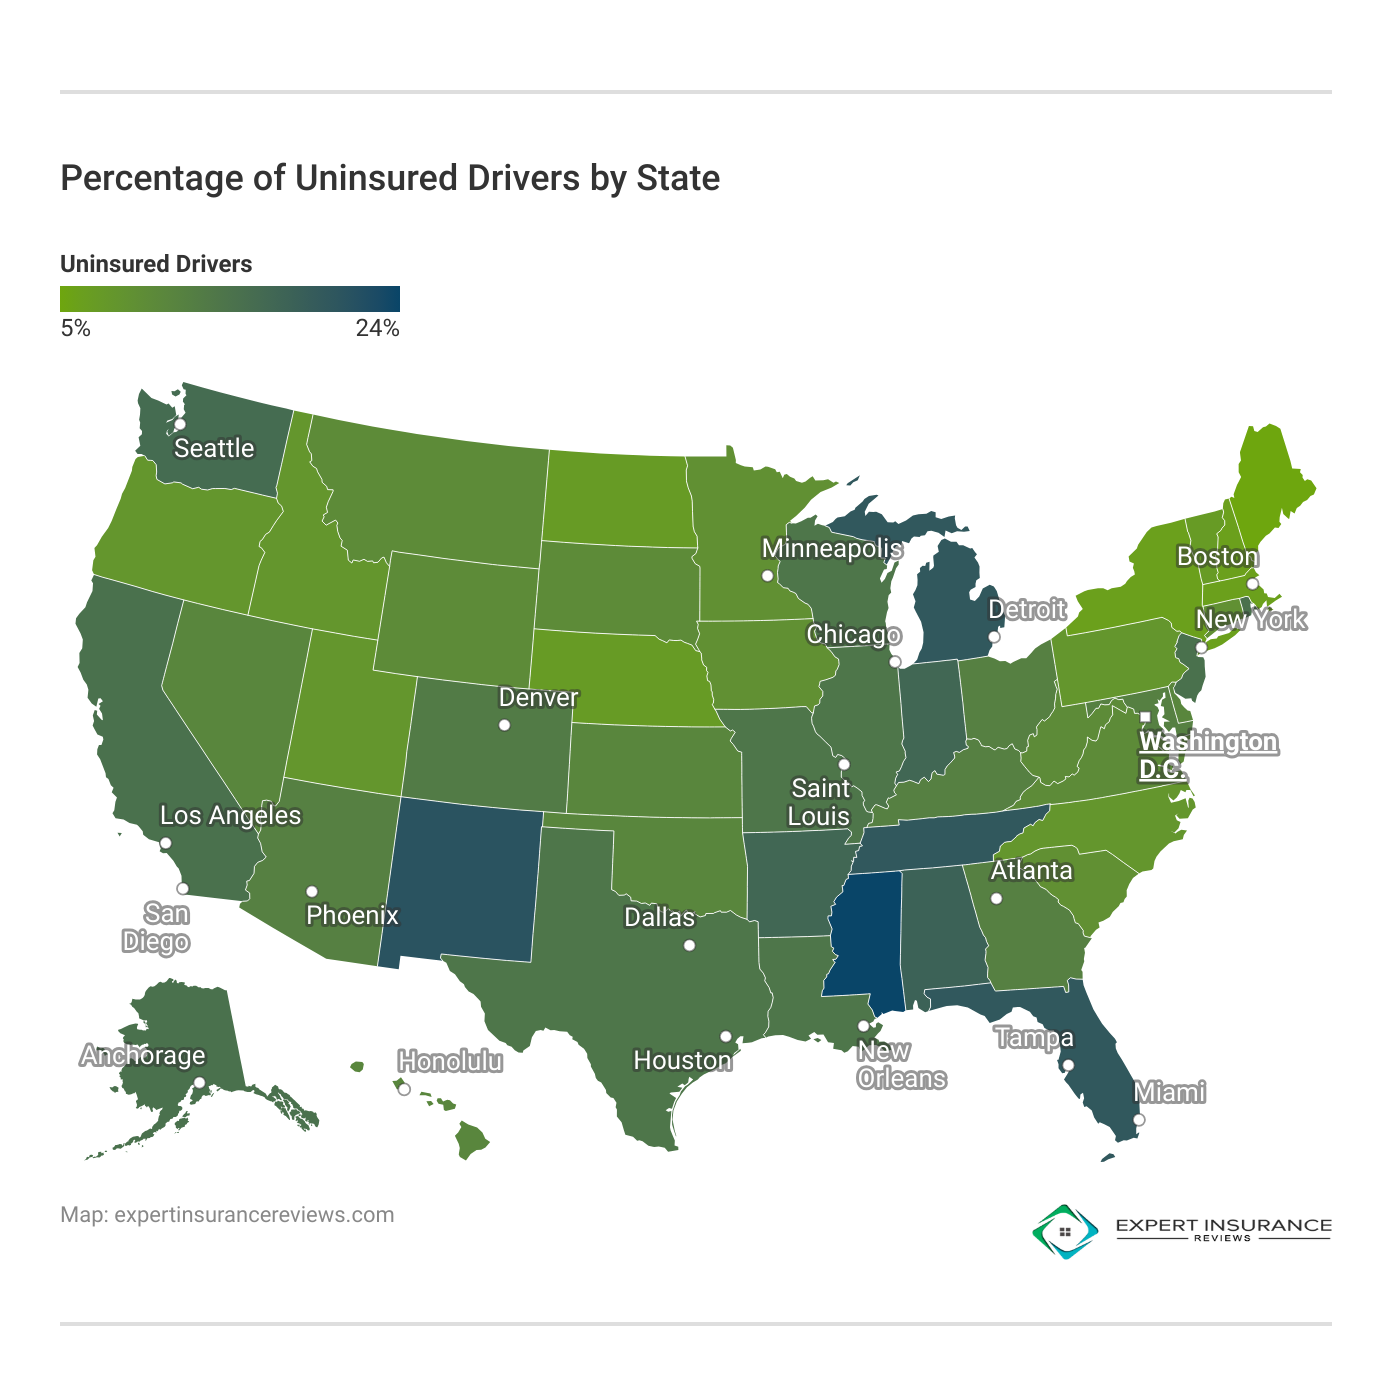 <h3>Percentage of Uninsured Drivers by State</h3>